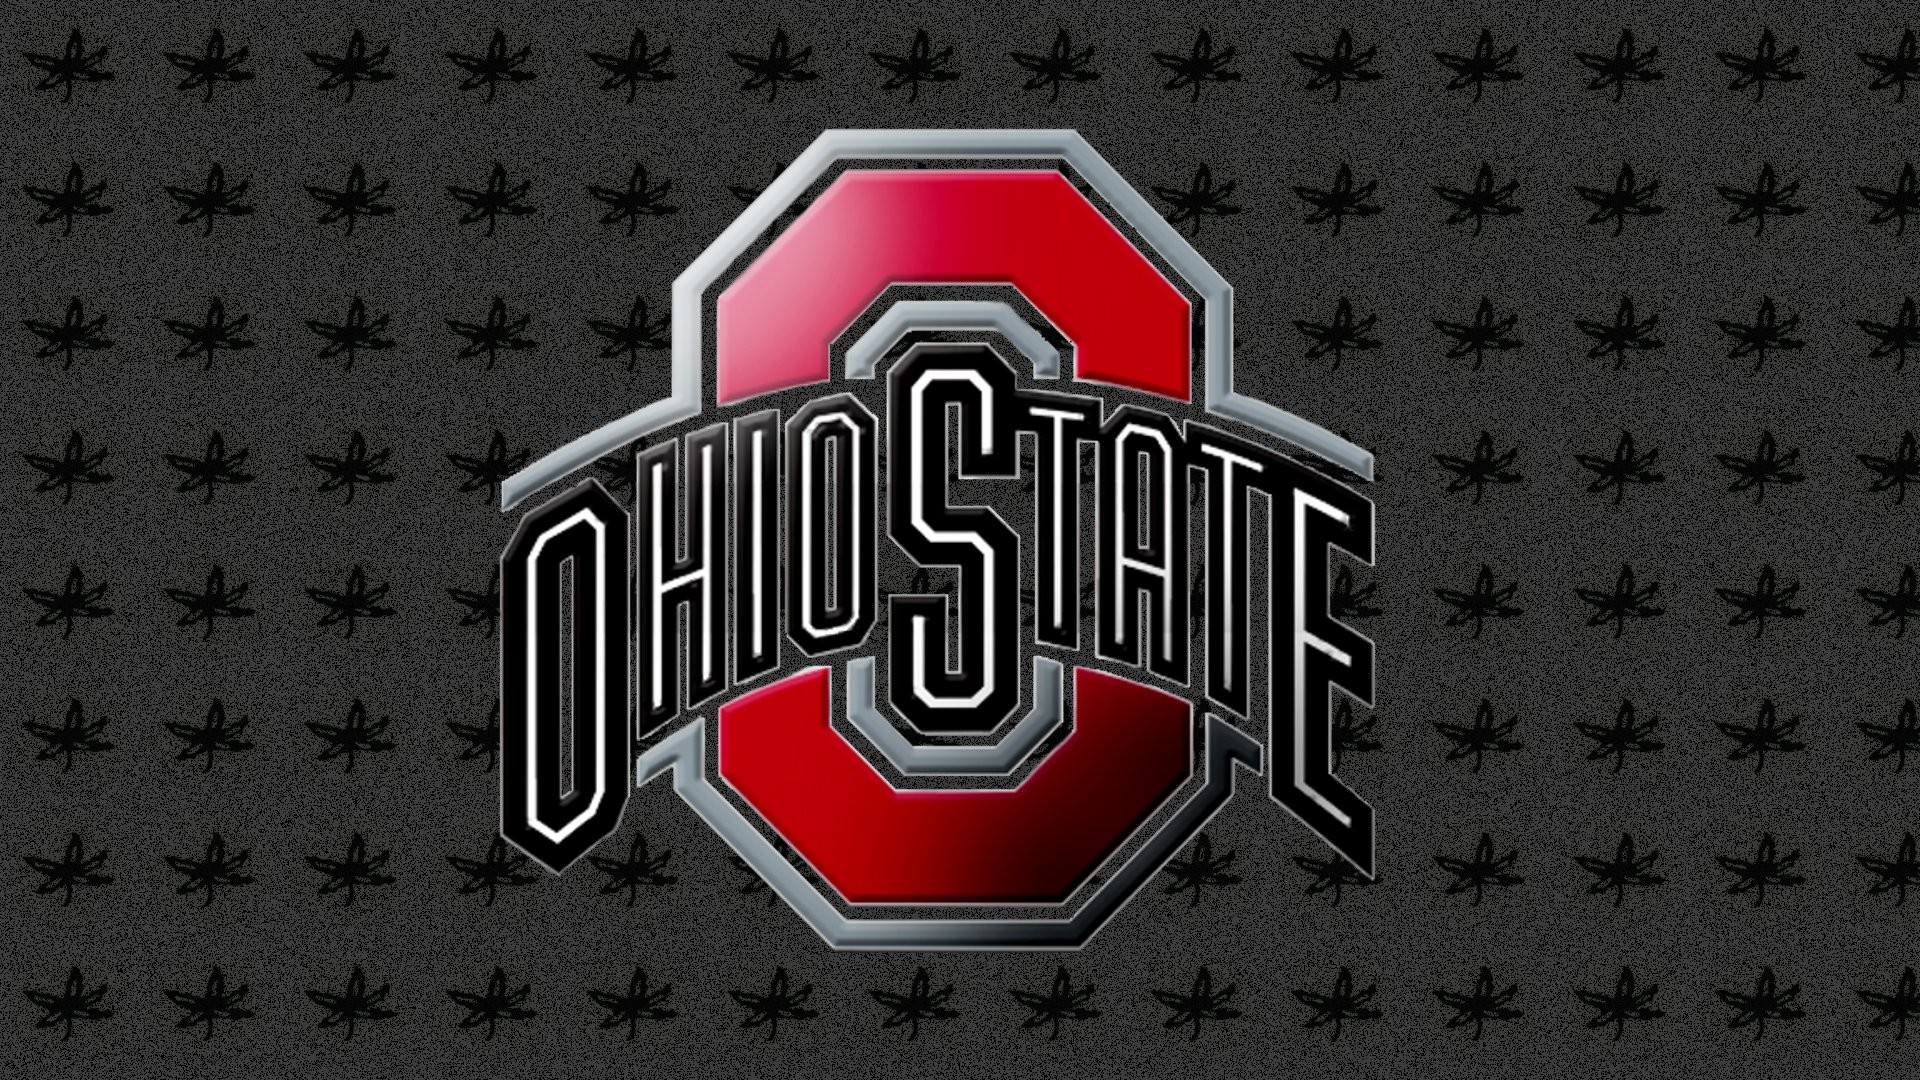 1920x1080 HD Wallpaper and background photos of OSU Desktop Wallpaper 55 for fans of Ohio  State Football images.